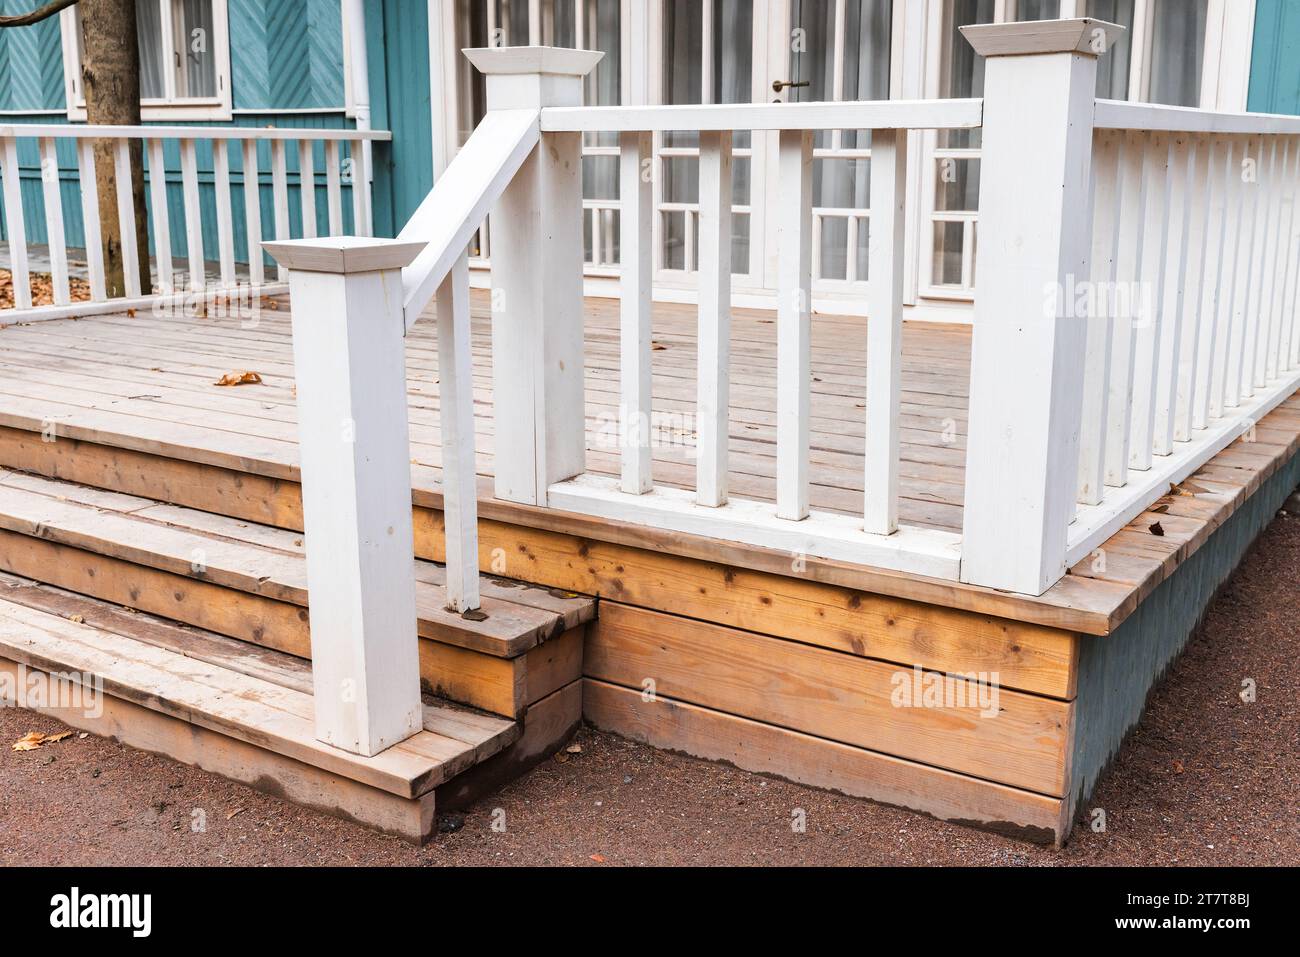 Backyard background photo with an empty wooden porch and stairs with white handrails Stock Photo